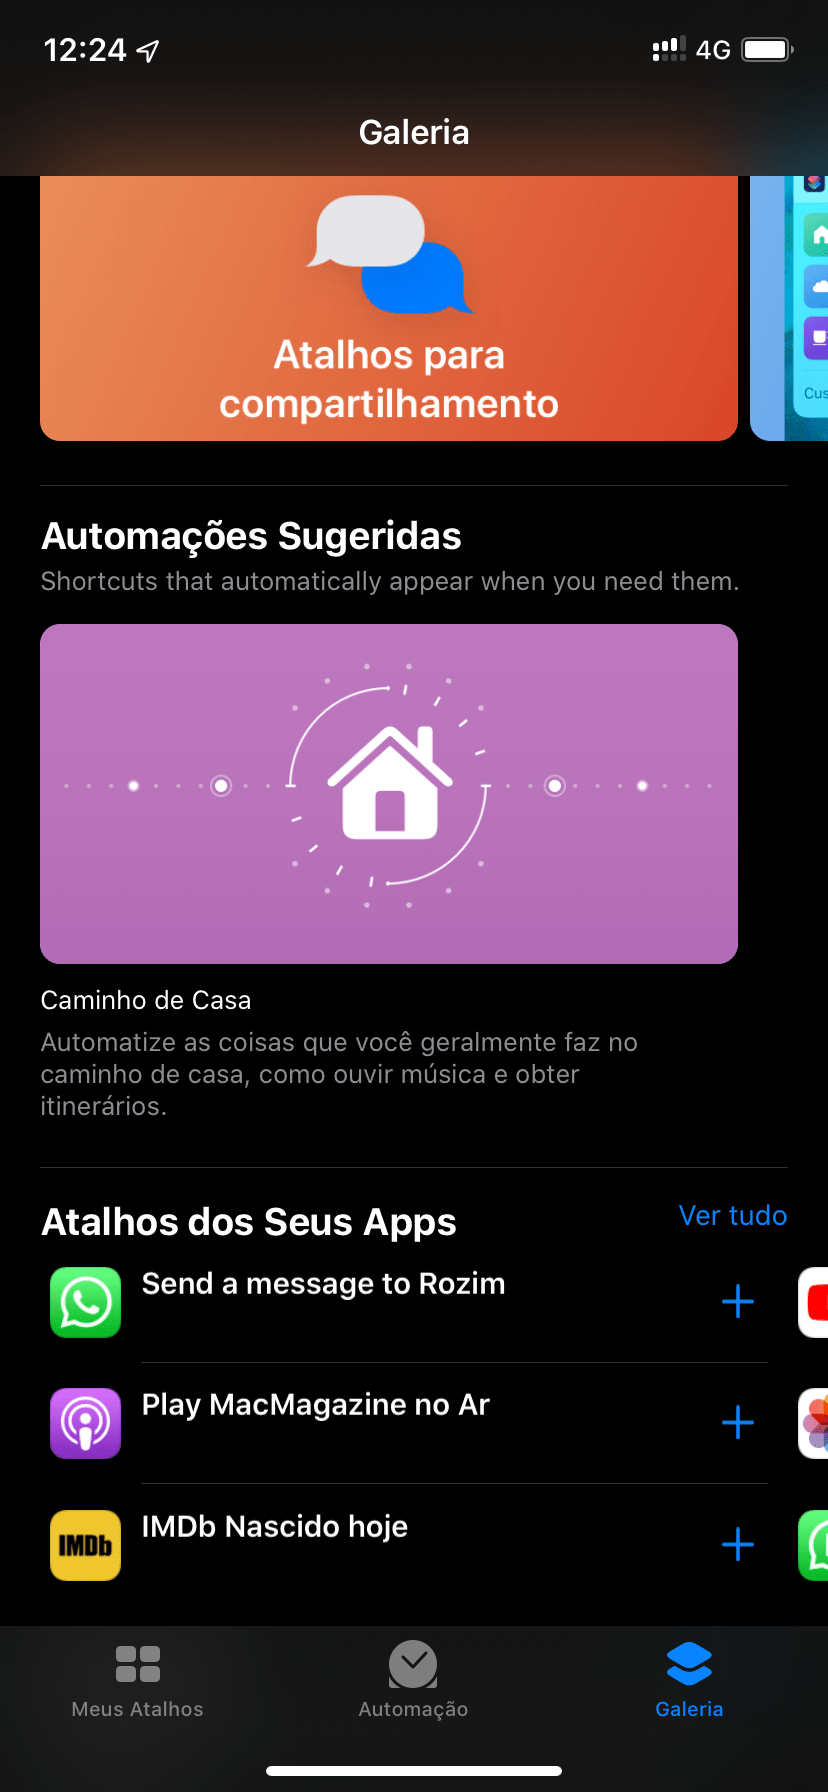 iOS 13: Changes in the Shortcuts app, which gets automatic actions